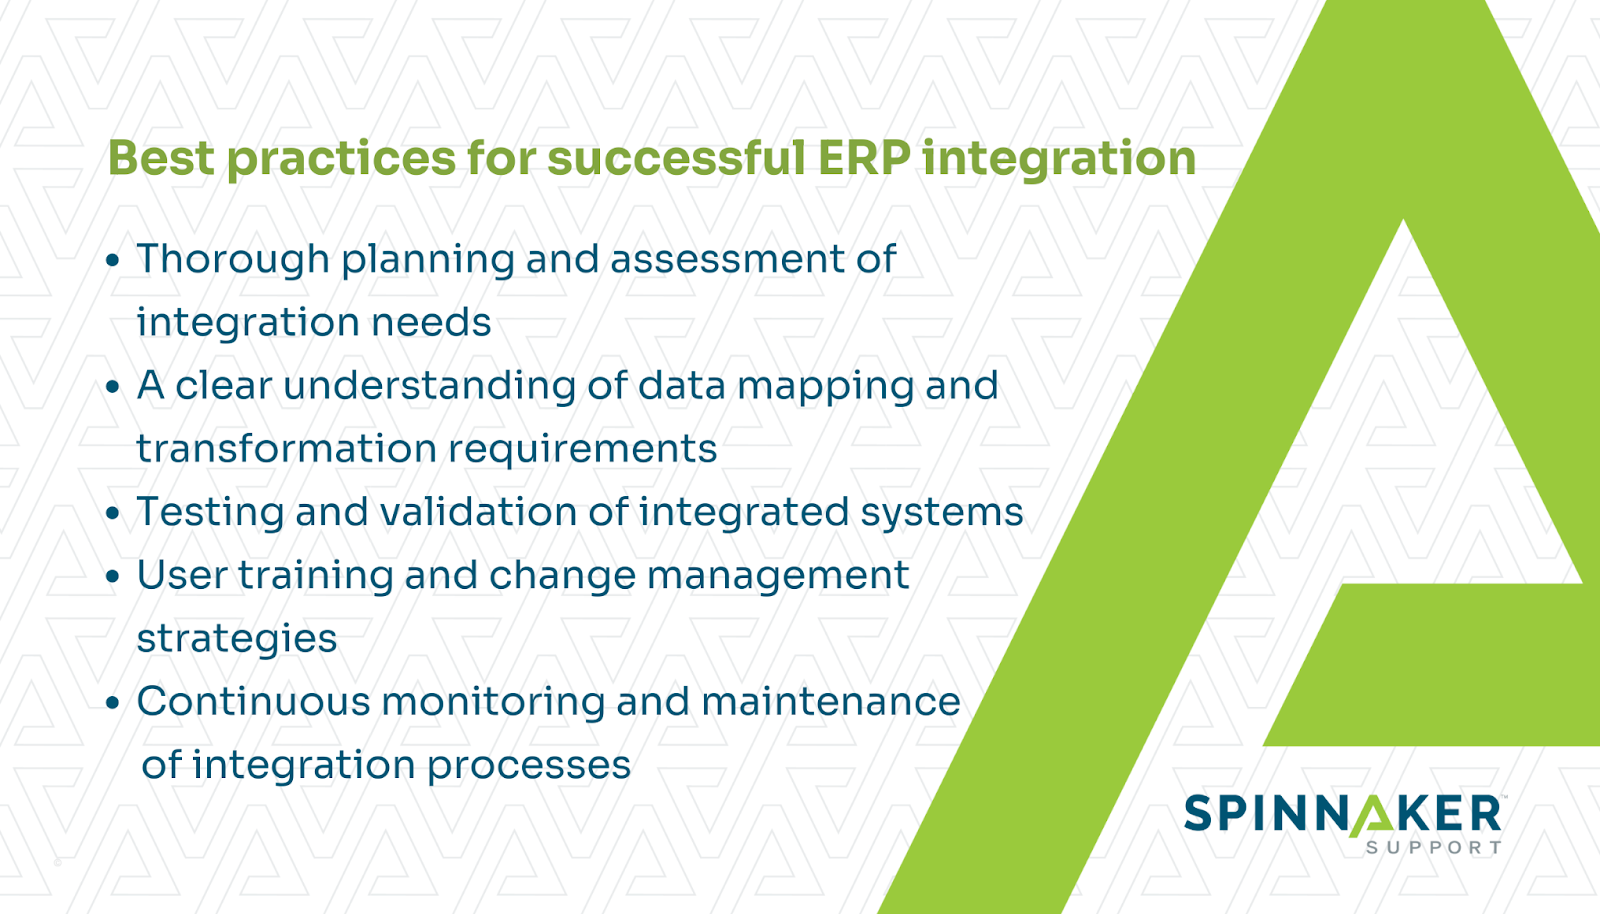 5 best practices for successful ERP integration